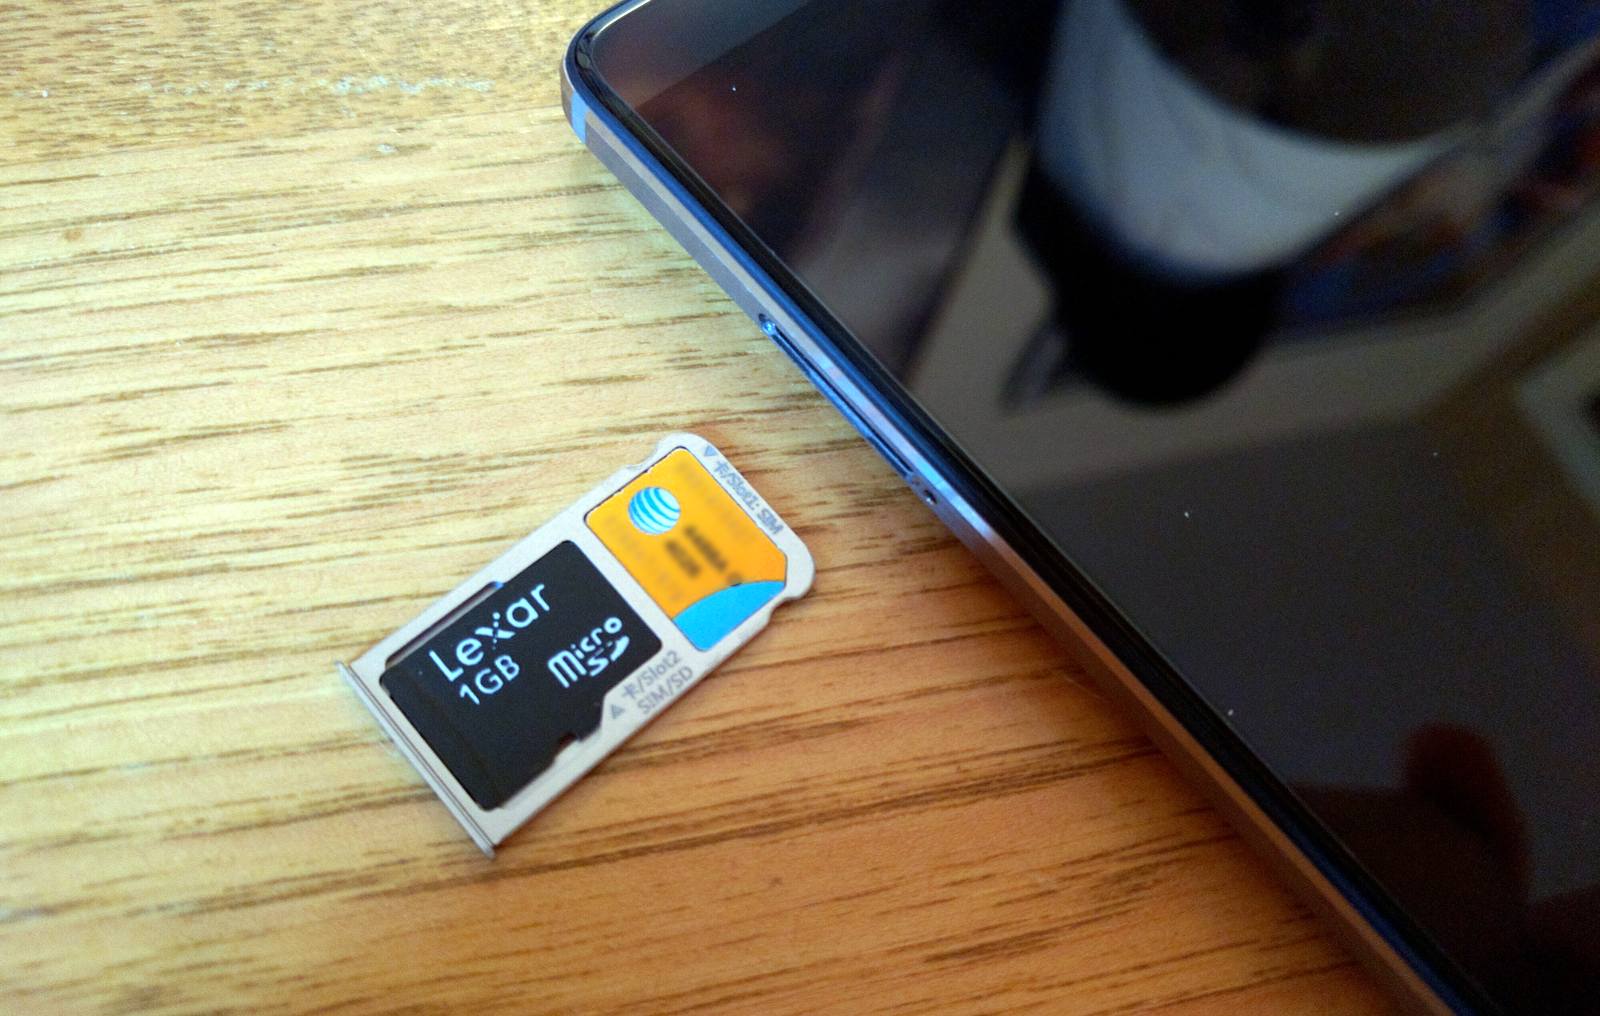 mate 8 sd card.png